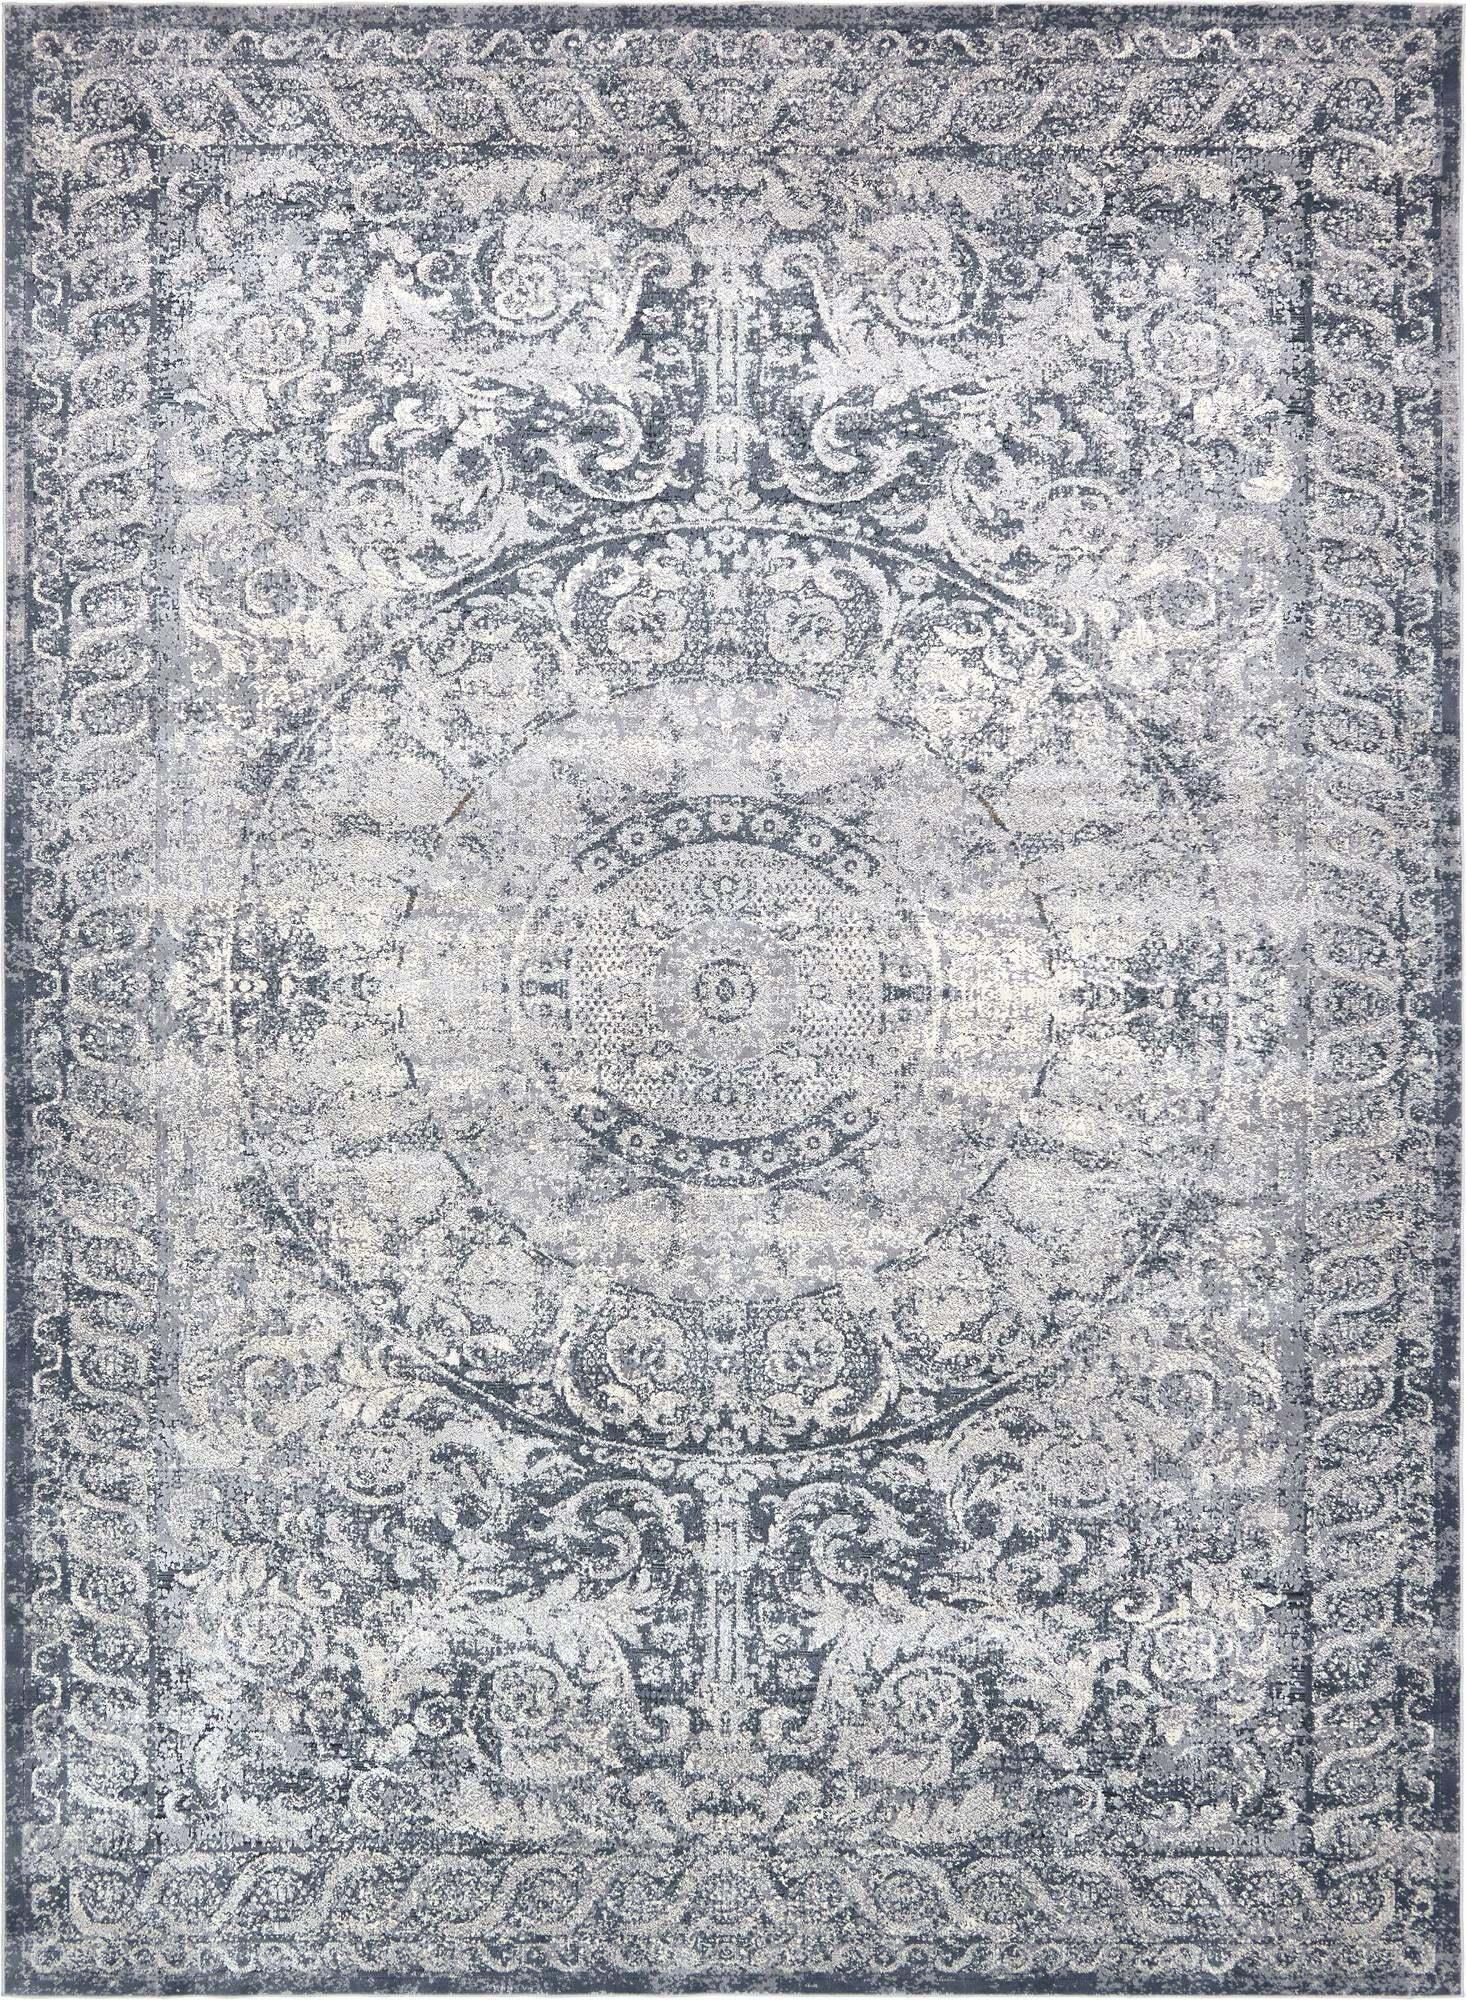 Unique Loom Indoor Rugs - Chateau Border Rectangular 9x12 Rug Navy Blue & Gray